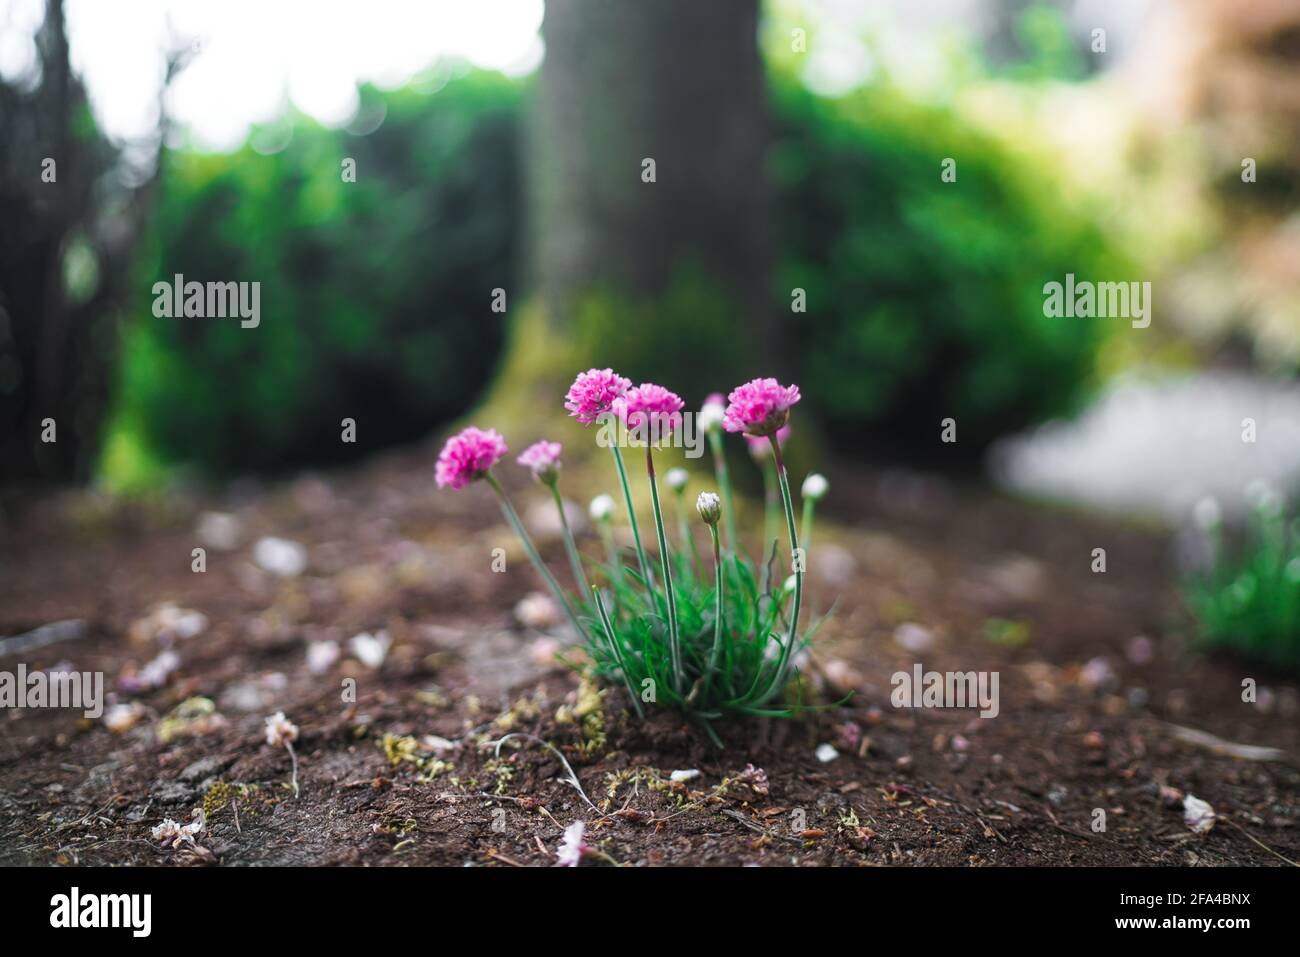 Home Gardening Small Pink Flowers Stock Photo